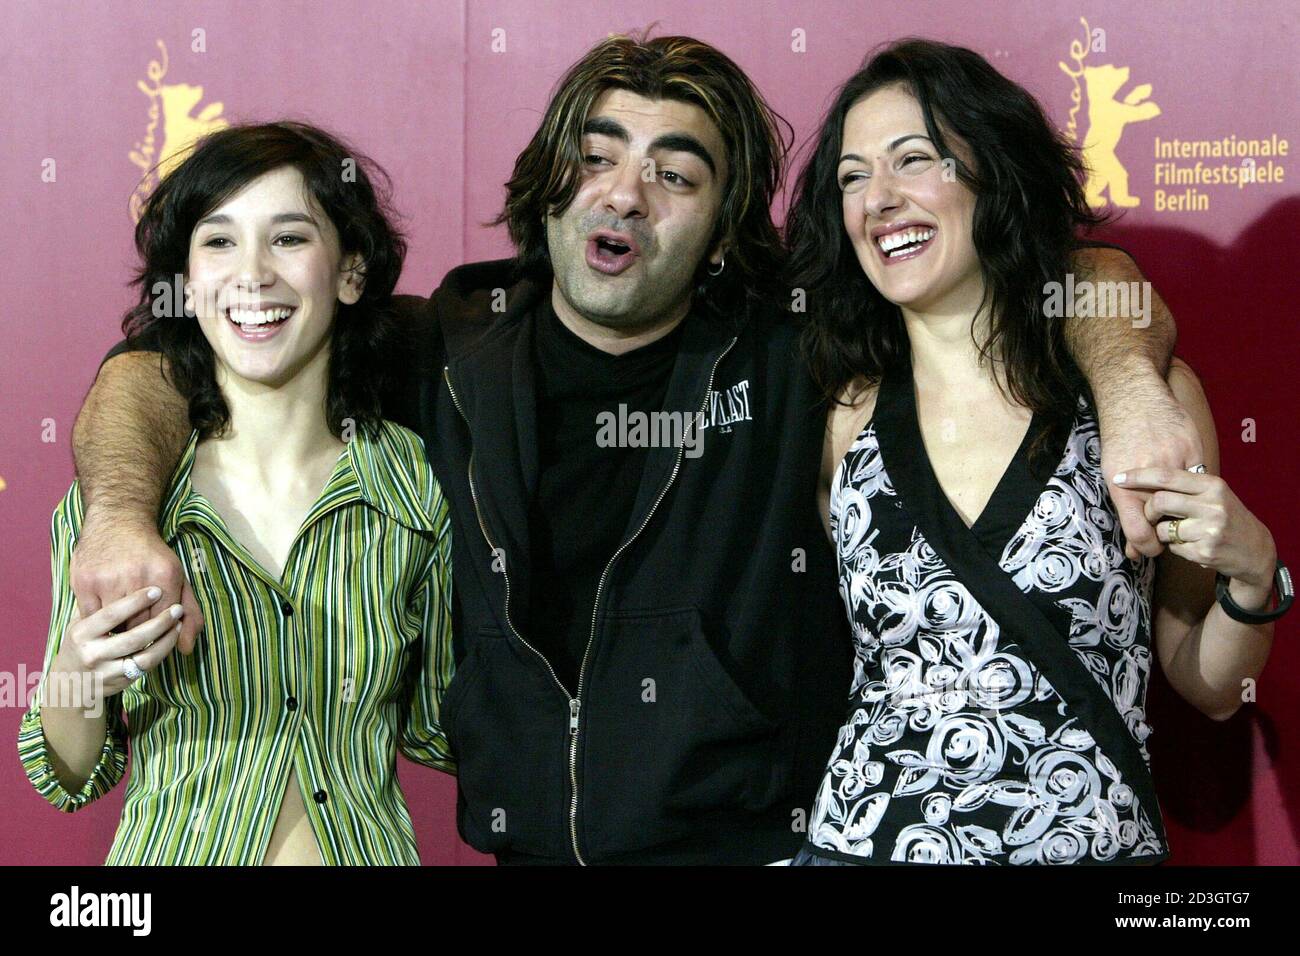 Turkish actress Sibel Kekilli, director Fatih Akin and Turkish actress  Meltem Cumbul (L-R) pose for the media during a photocall to present the  movie 'Gegen die Wand' (Head On) as part of